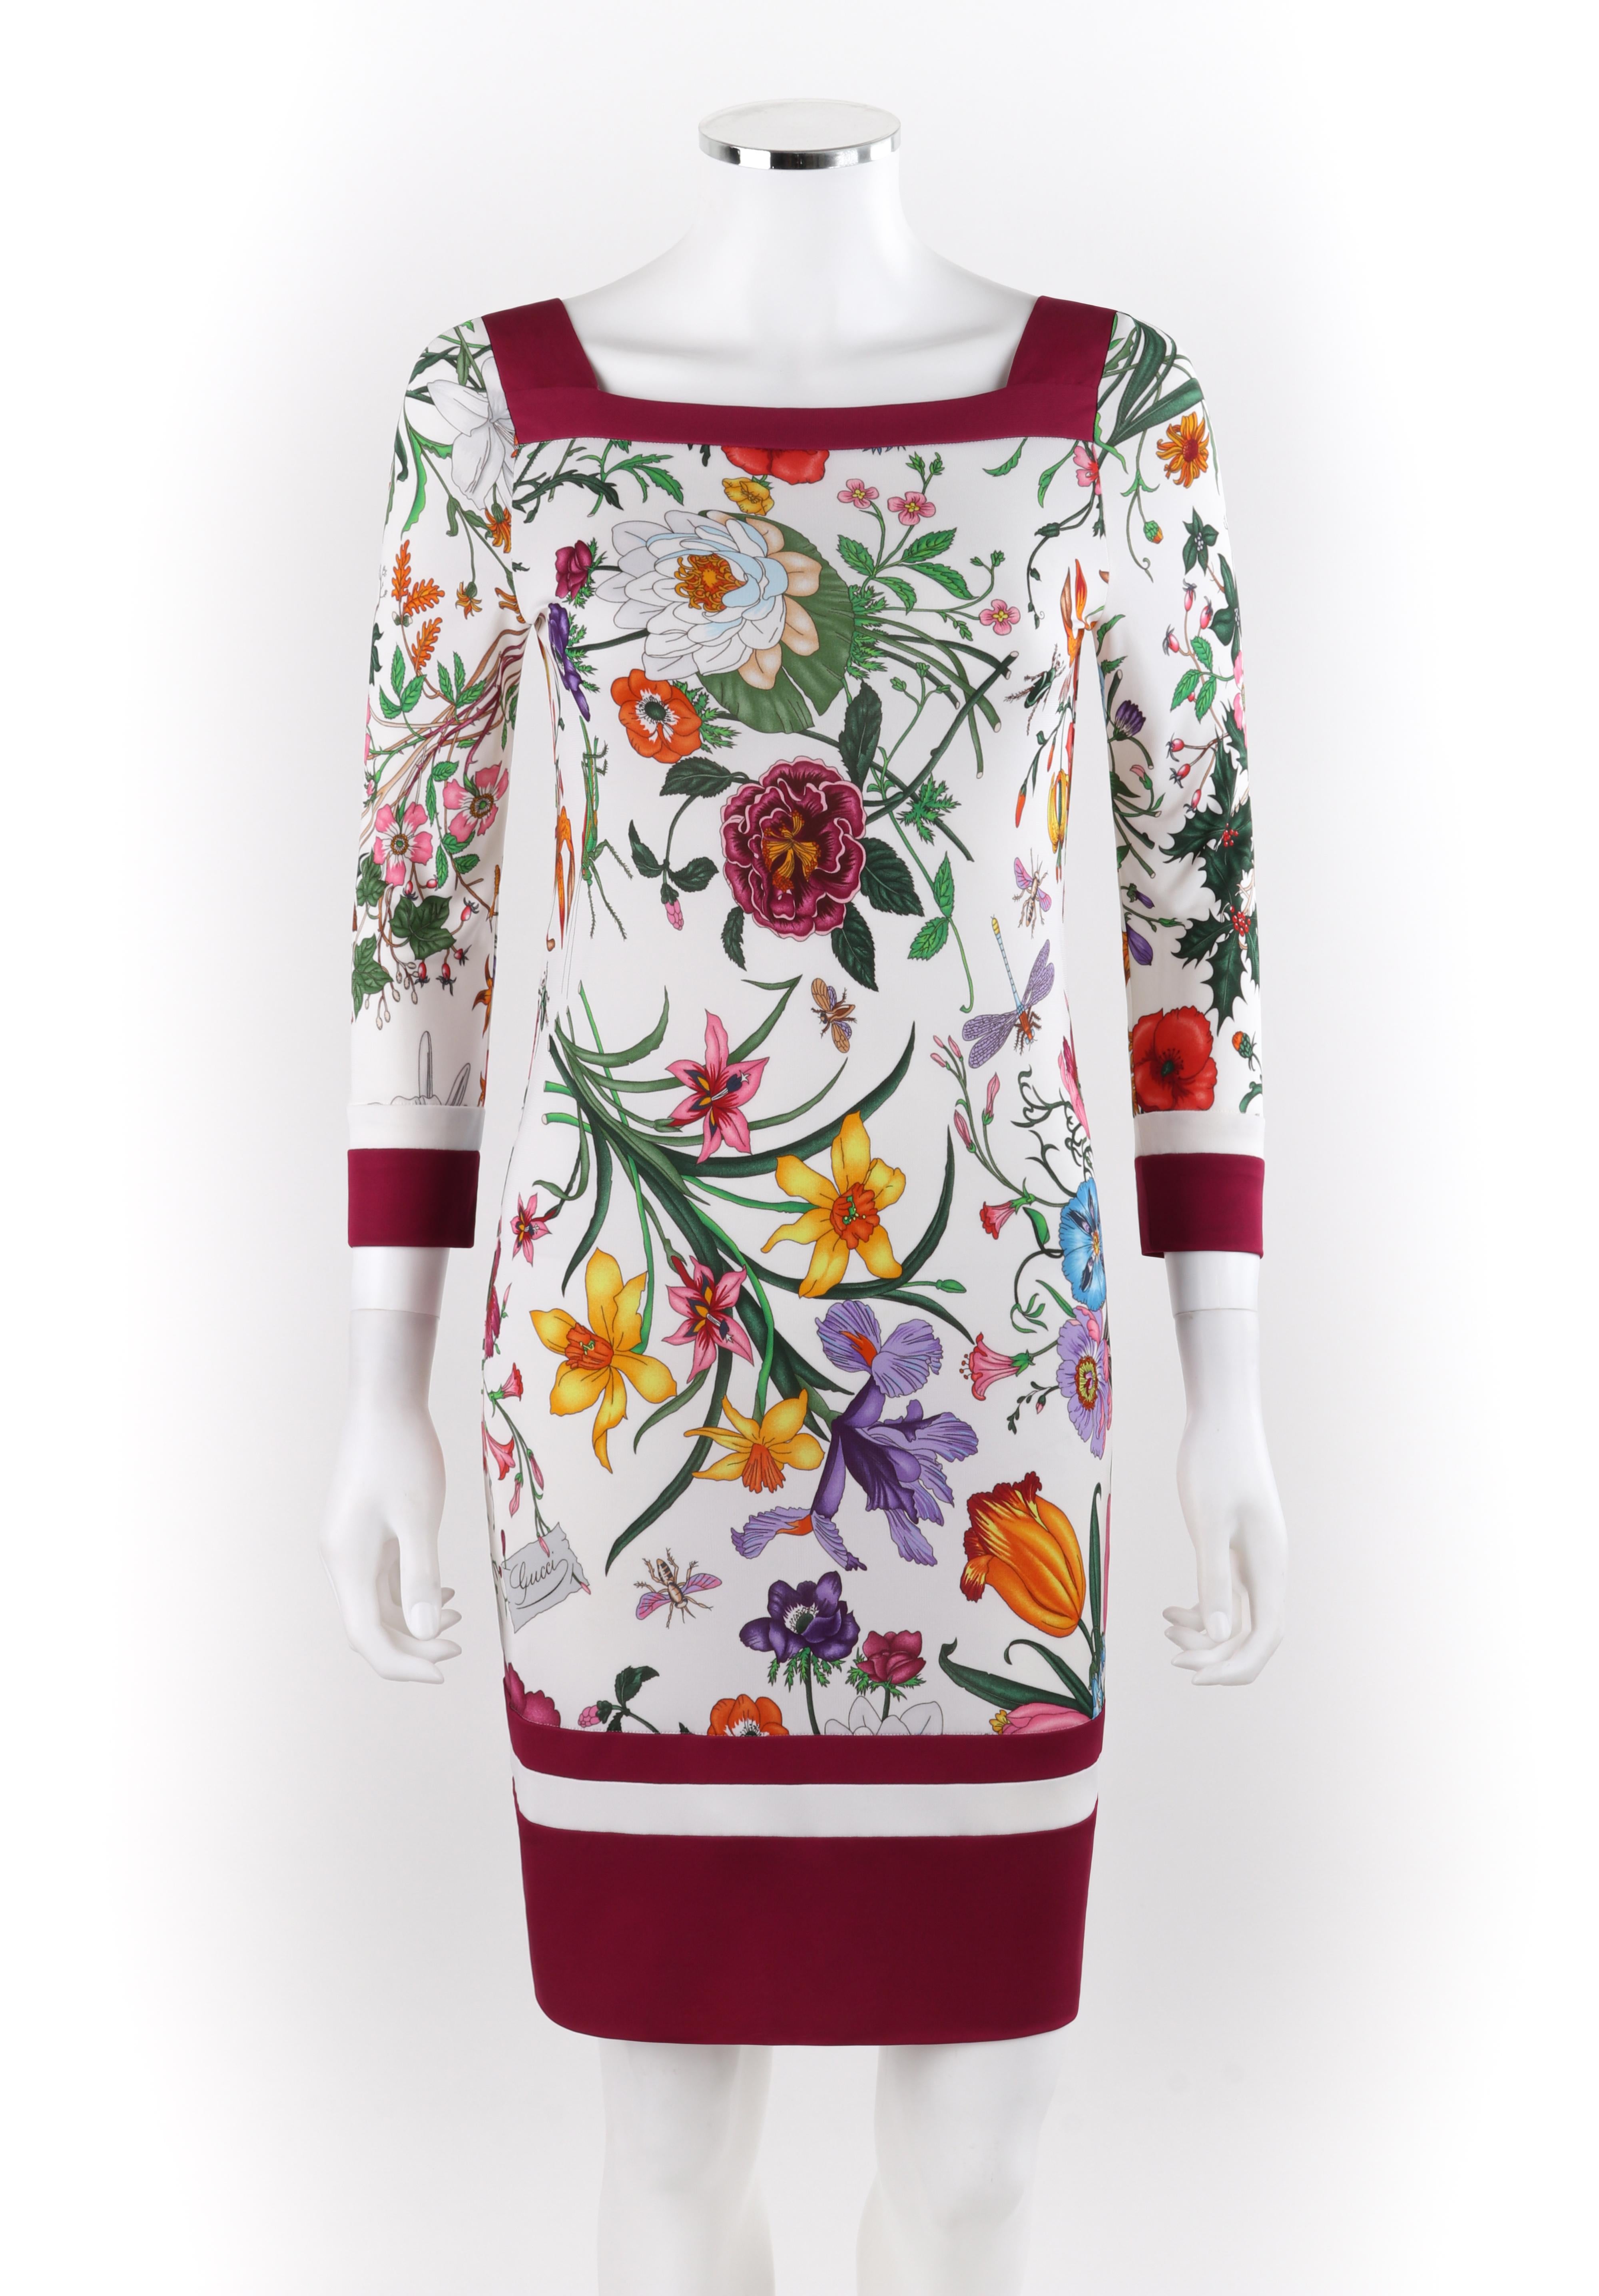 GUCCI Resort 2013 FRIDA GIANNINI Square Neck 3/4 Sleeve Floral Print Sun Dress
 
Brand / Manufacturer: Gucci
Collection: Resort 2013 
Style: Shift dress
Color(s): Multicolor on white background
Lined: No
Marked Fabric Content: 100% rayon
Additional